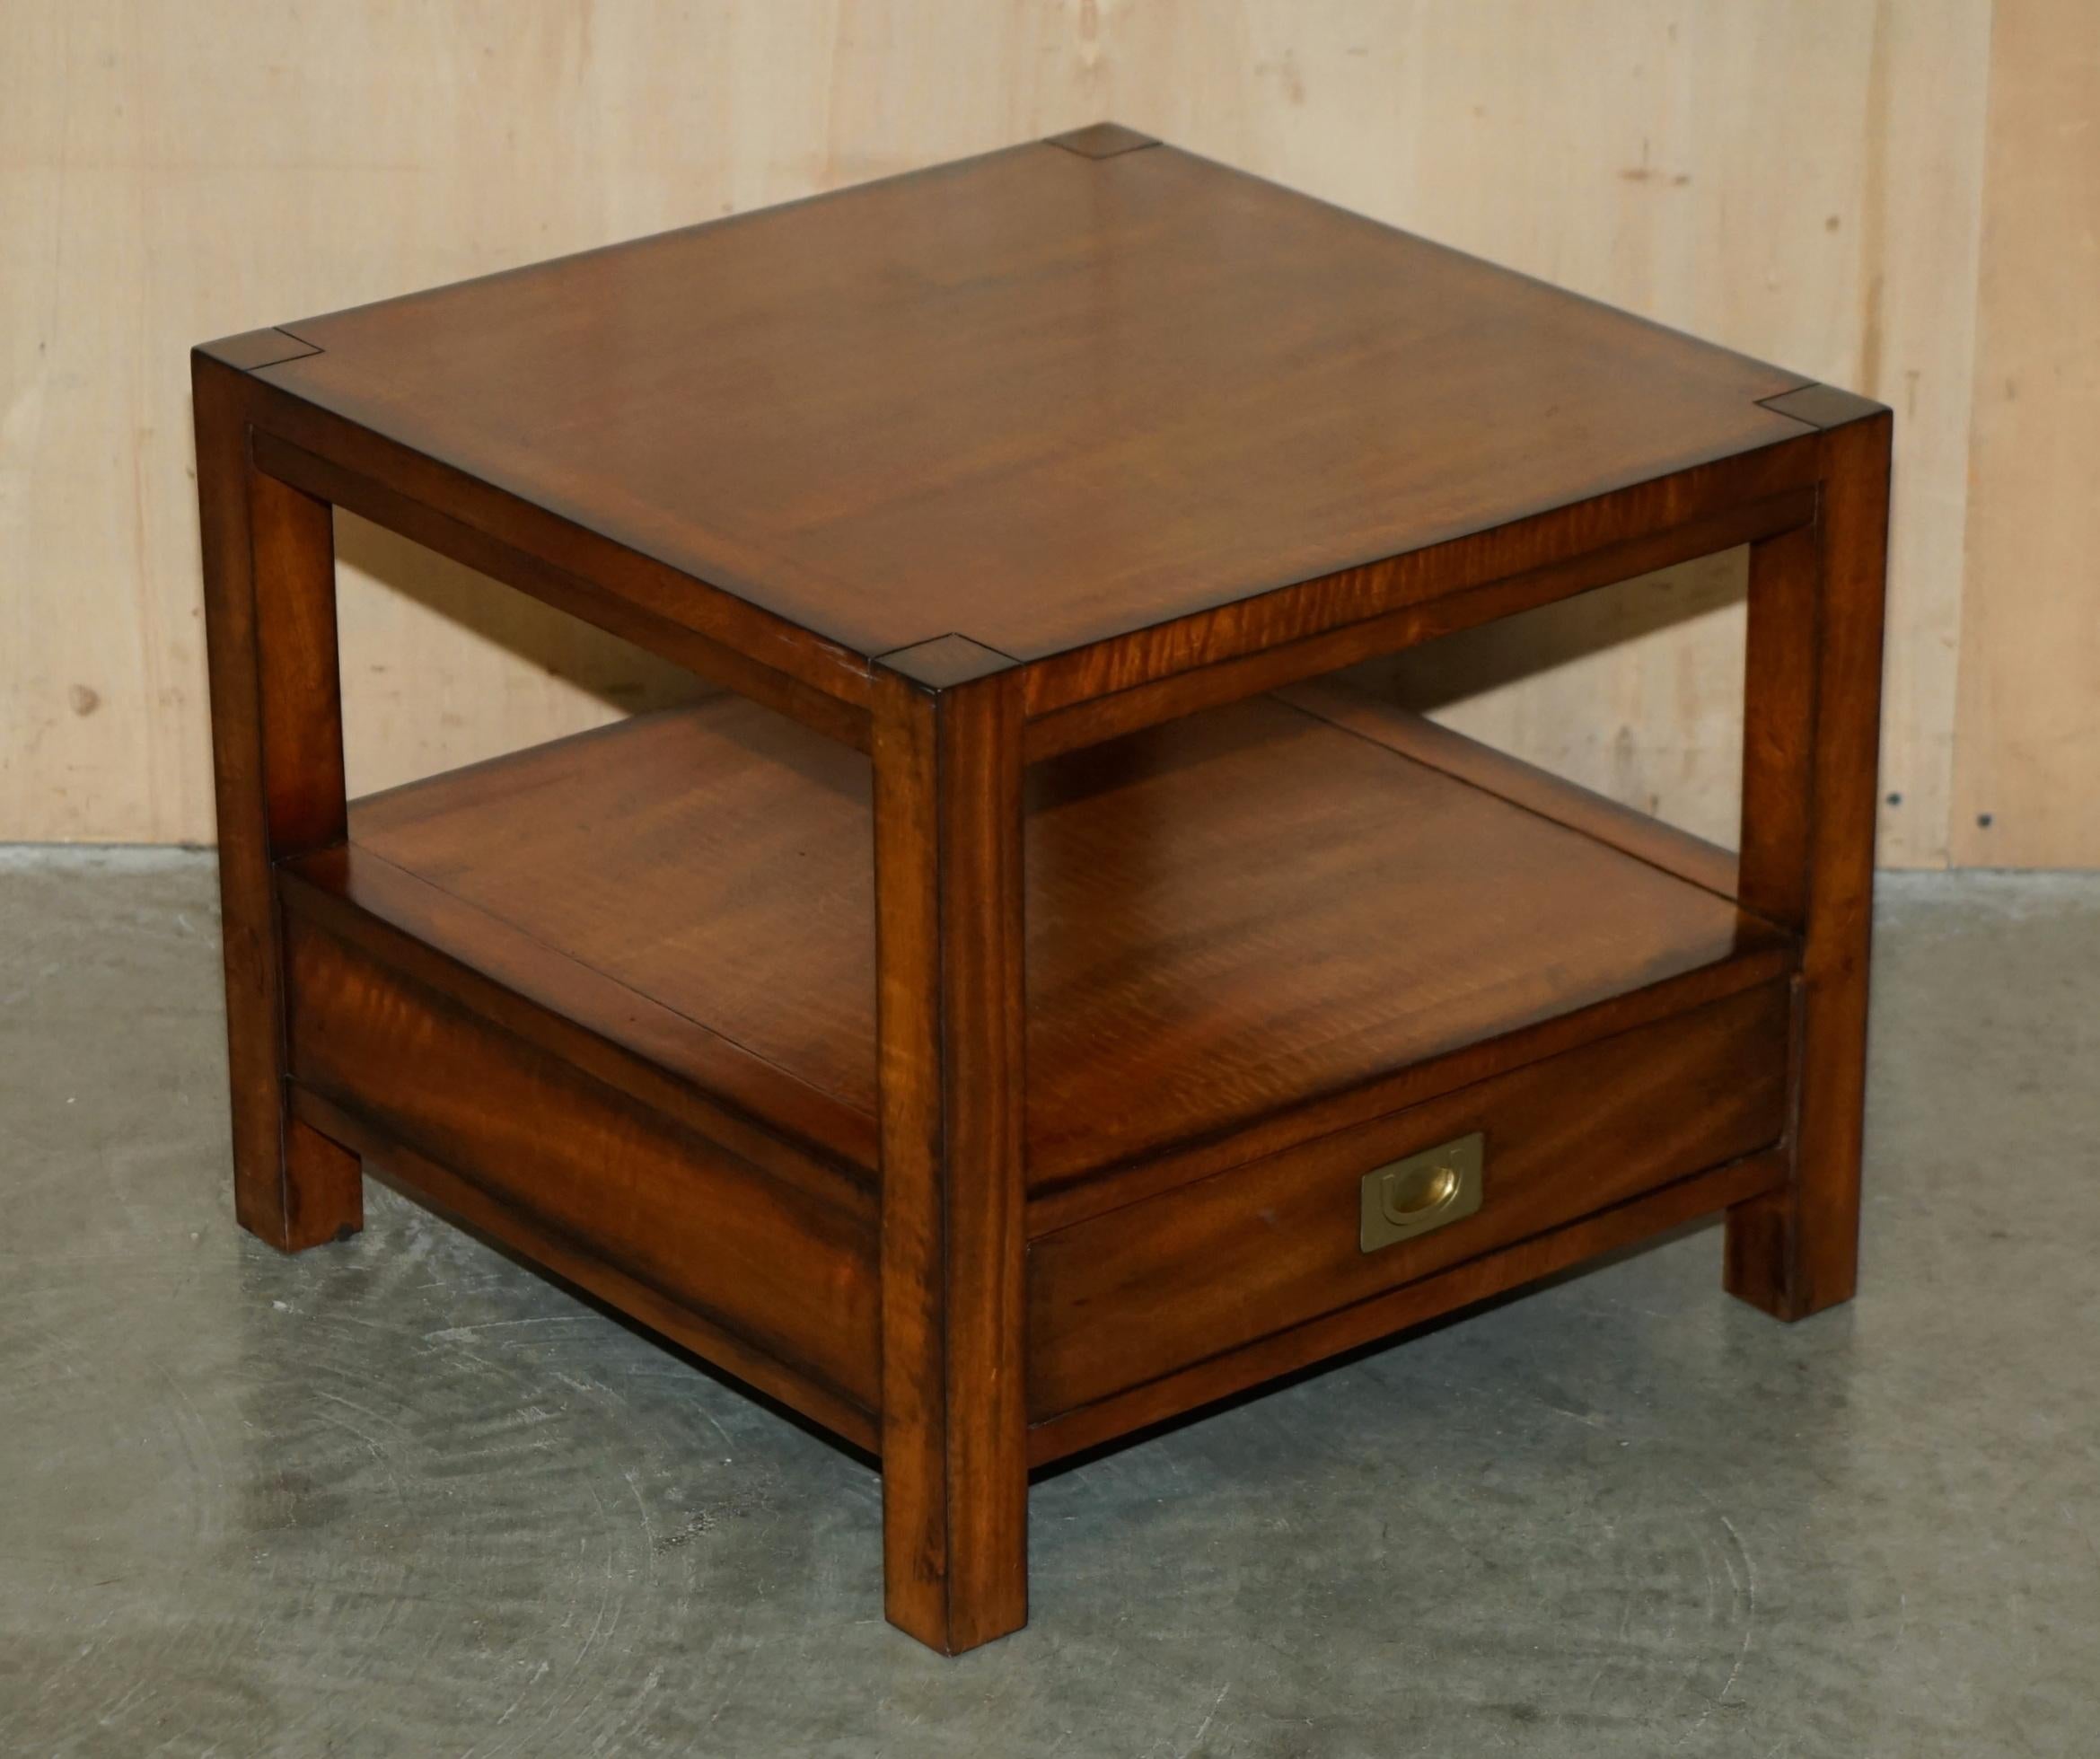 STUNNING PAIR OF TWO TIER MILITARY CAMPAIGN SiDE END TABLES LARGE SINGLE DRAWERS For Sale 2